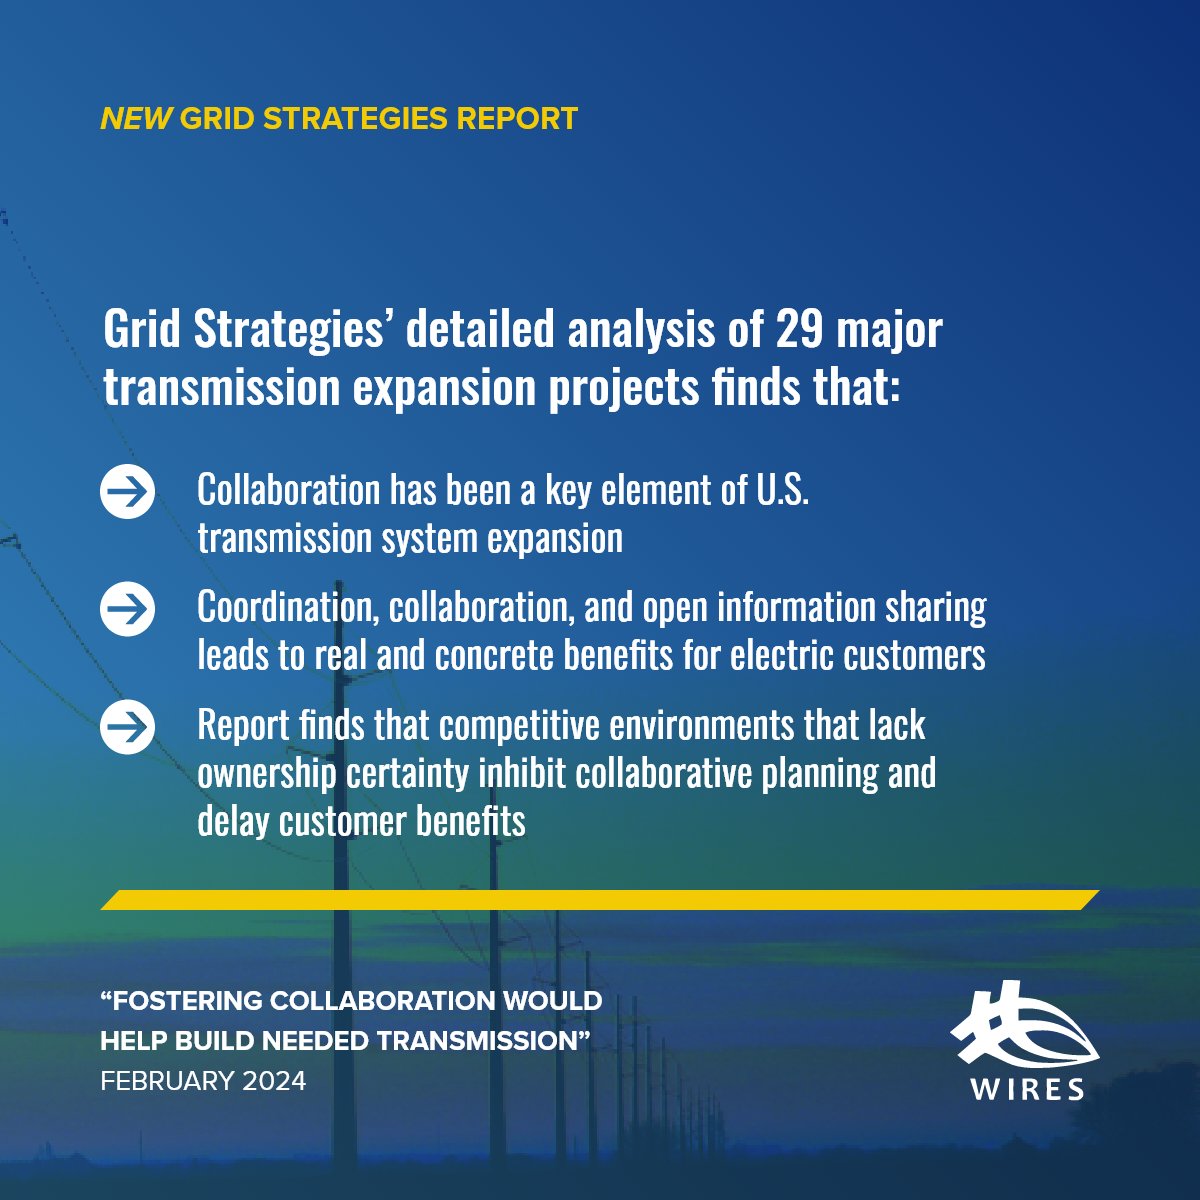 Glad to see the recent Grid Strategies analysis - Fostering Collaboration Would Help Build Needed Transmission - included in today's @BLaw article by @bydanielmoore.

news.bloomberglaw.com/environment-an…

Report: wiresgroup.com/fostering-coll…

#gridofthefuture #grid #gridmodernization #transmission